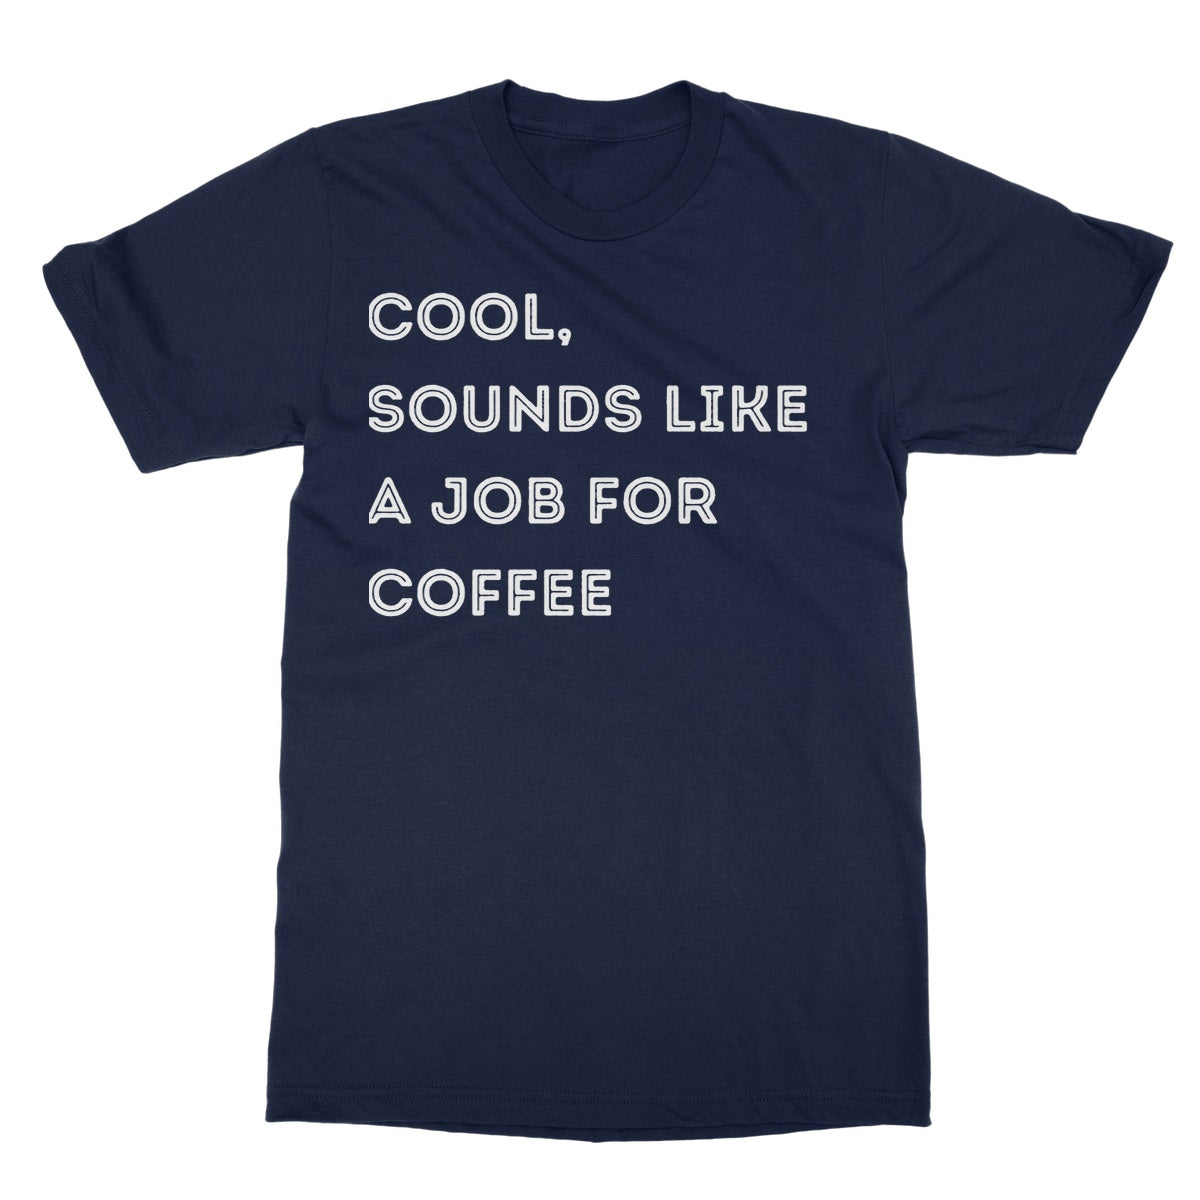 sounds like a job for coffee t shirt navy